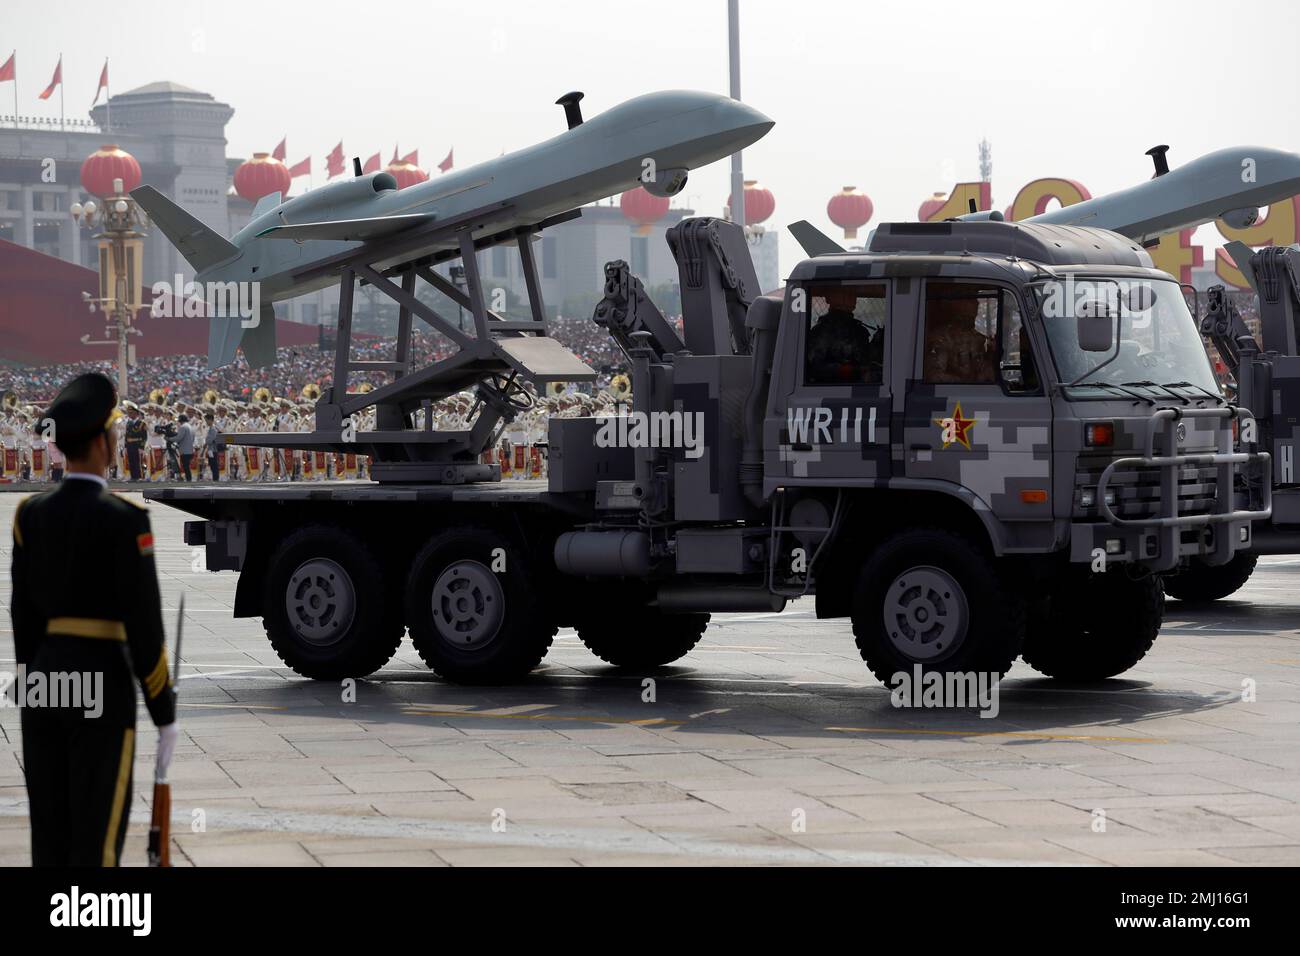 A Chinese military truck carrying an aerial vehicle rolls during a parade to commemorate the 70th anniversary of the founding of Communist China in Beijing, Tuesday, Oct. 1, 2019. Trucks carrying weapons including a nuclear-armed missile designed to evade U.S. defenses rumbled through Beijing as the Communist Party celebrated its 70th anniversary in power with a parade Tuesday that showcased China's ambition as a rising global force. (AP Photo/Mark Schiefelbein) Stock Photo